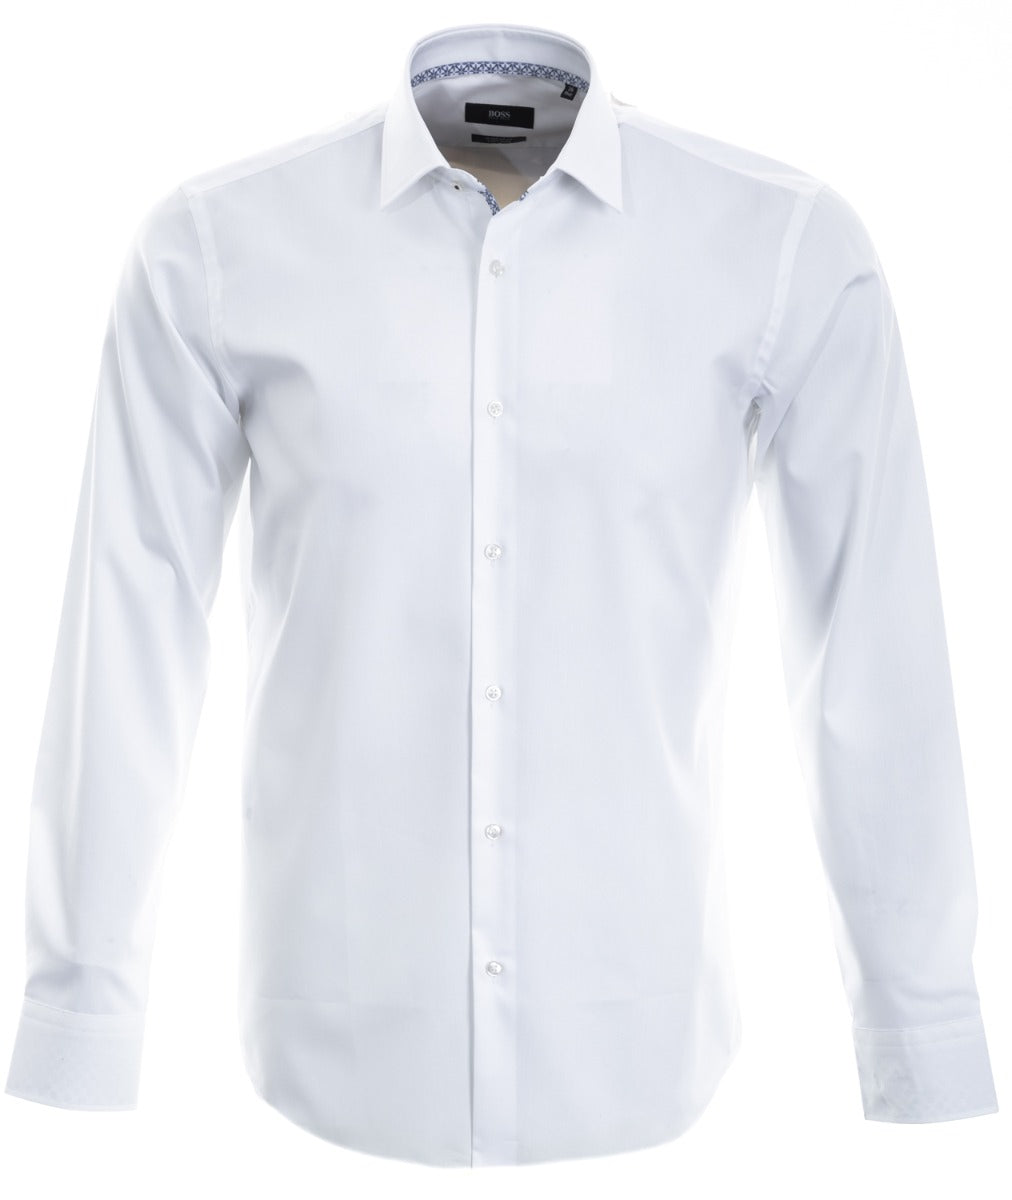 Boss Gelson Shirt in White Front